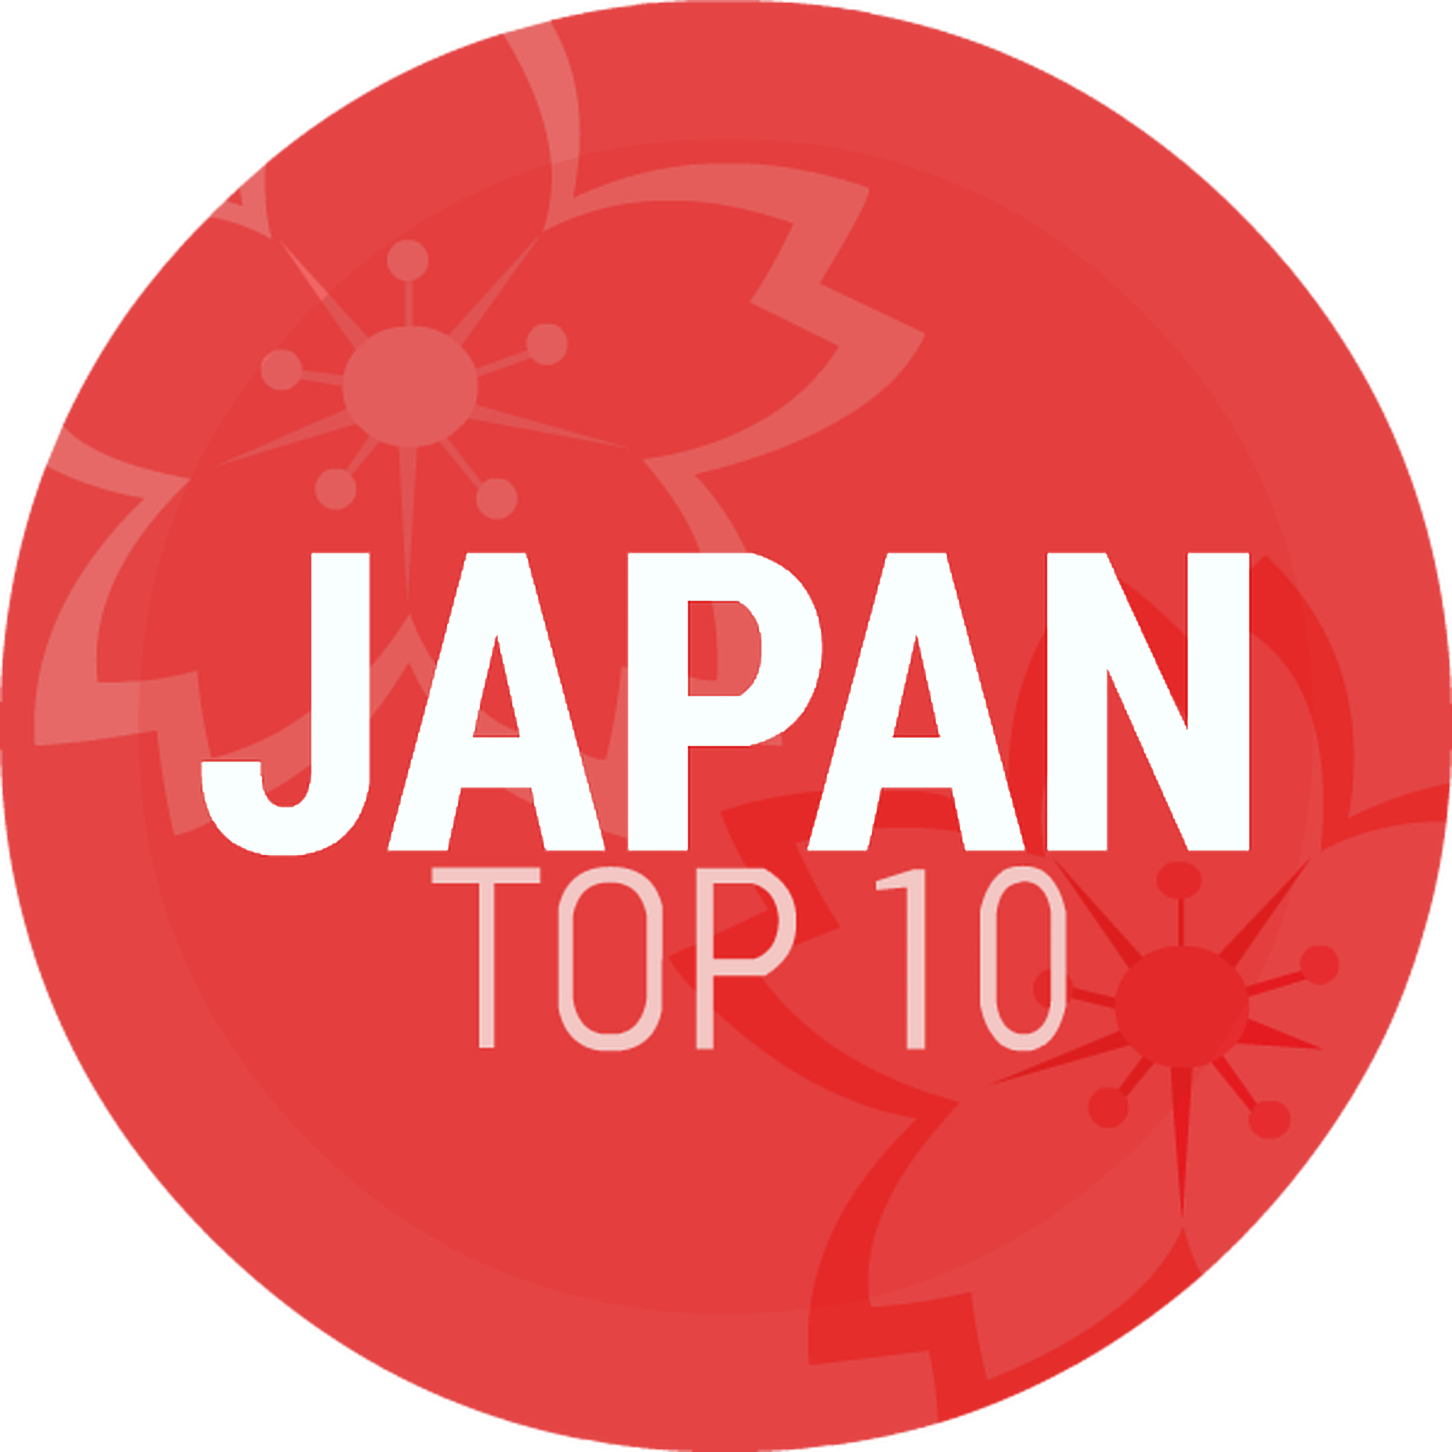 Episode 73: Japan Top 10 Mid/Late February 2015 Countdown